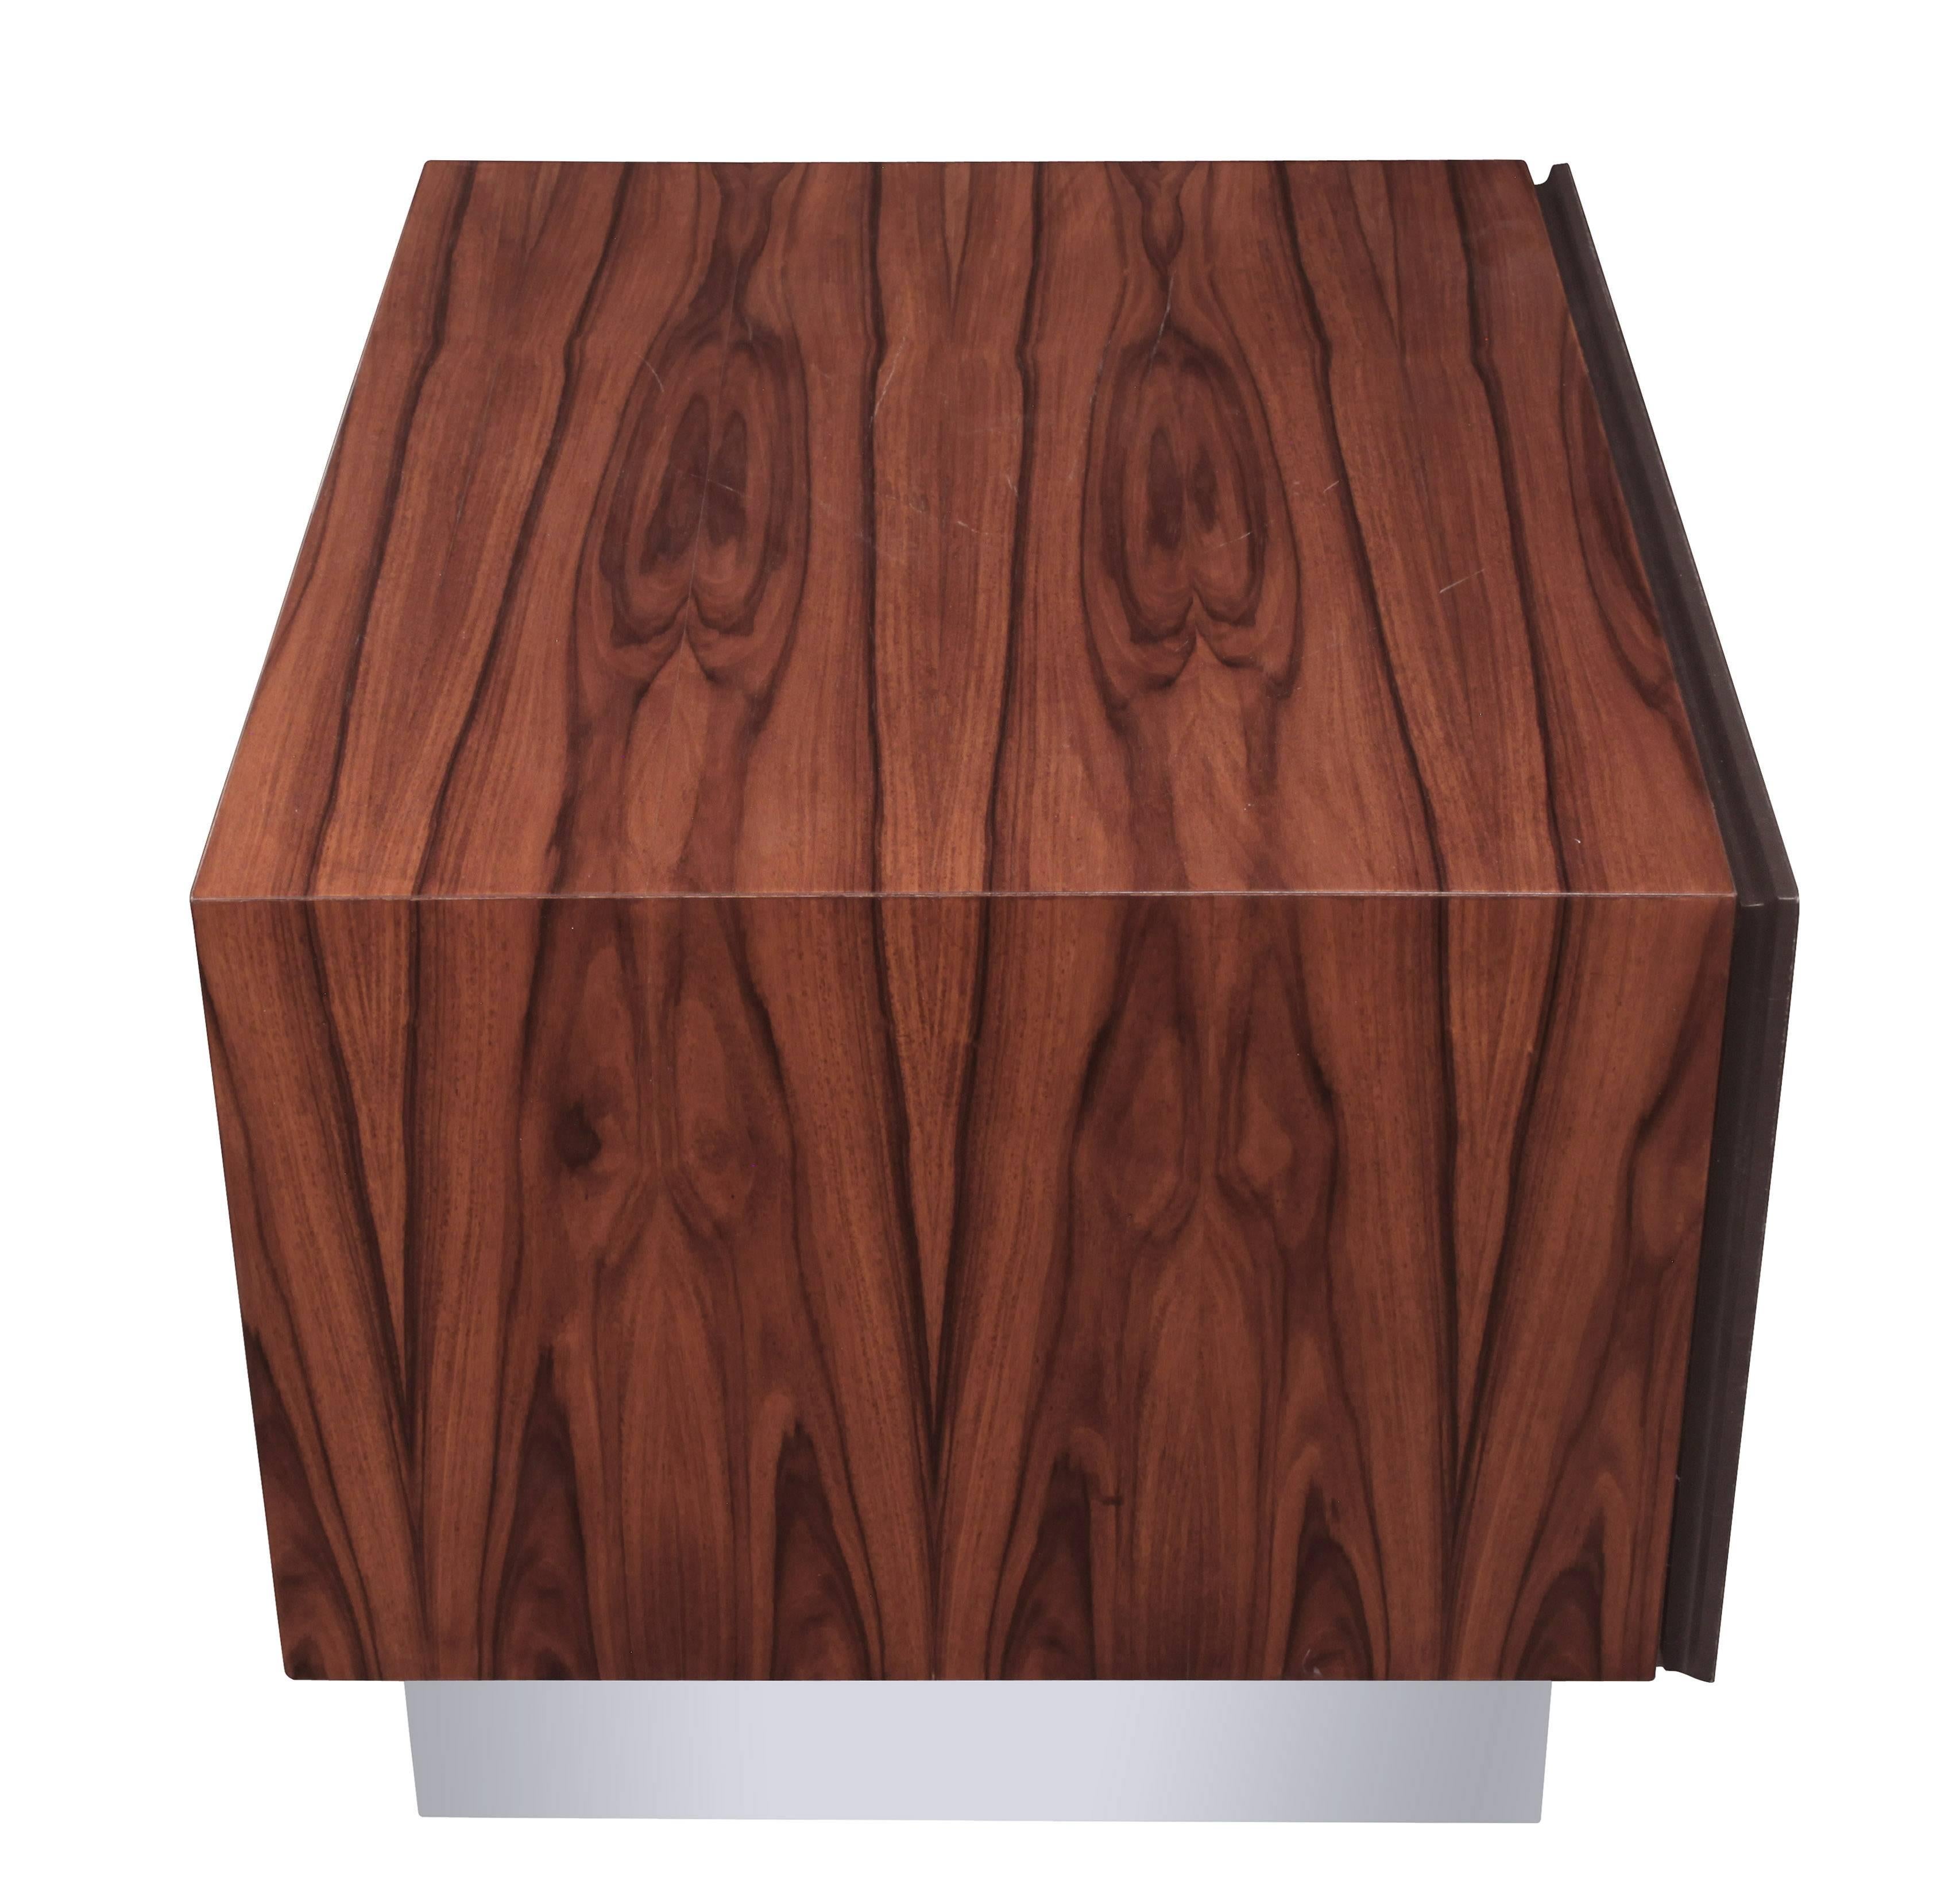 American Pair of Clean-Line Bedside End Tables in Brazilian Rosewood by Milo Baughman